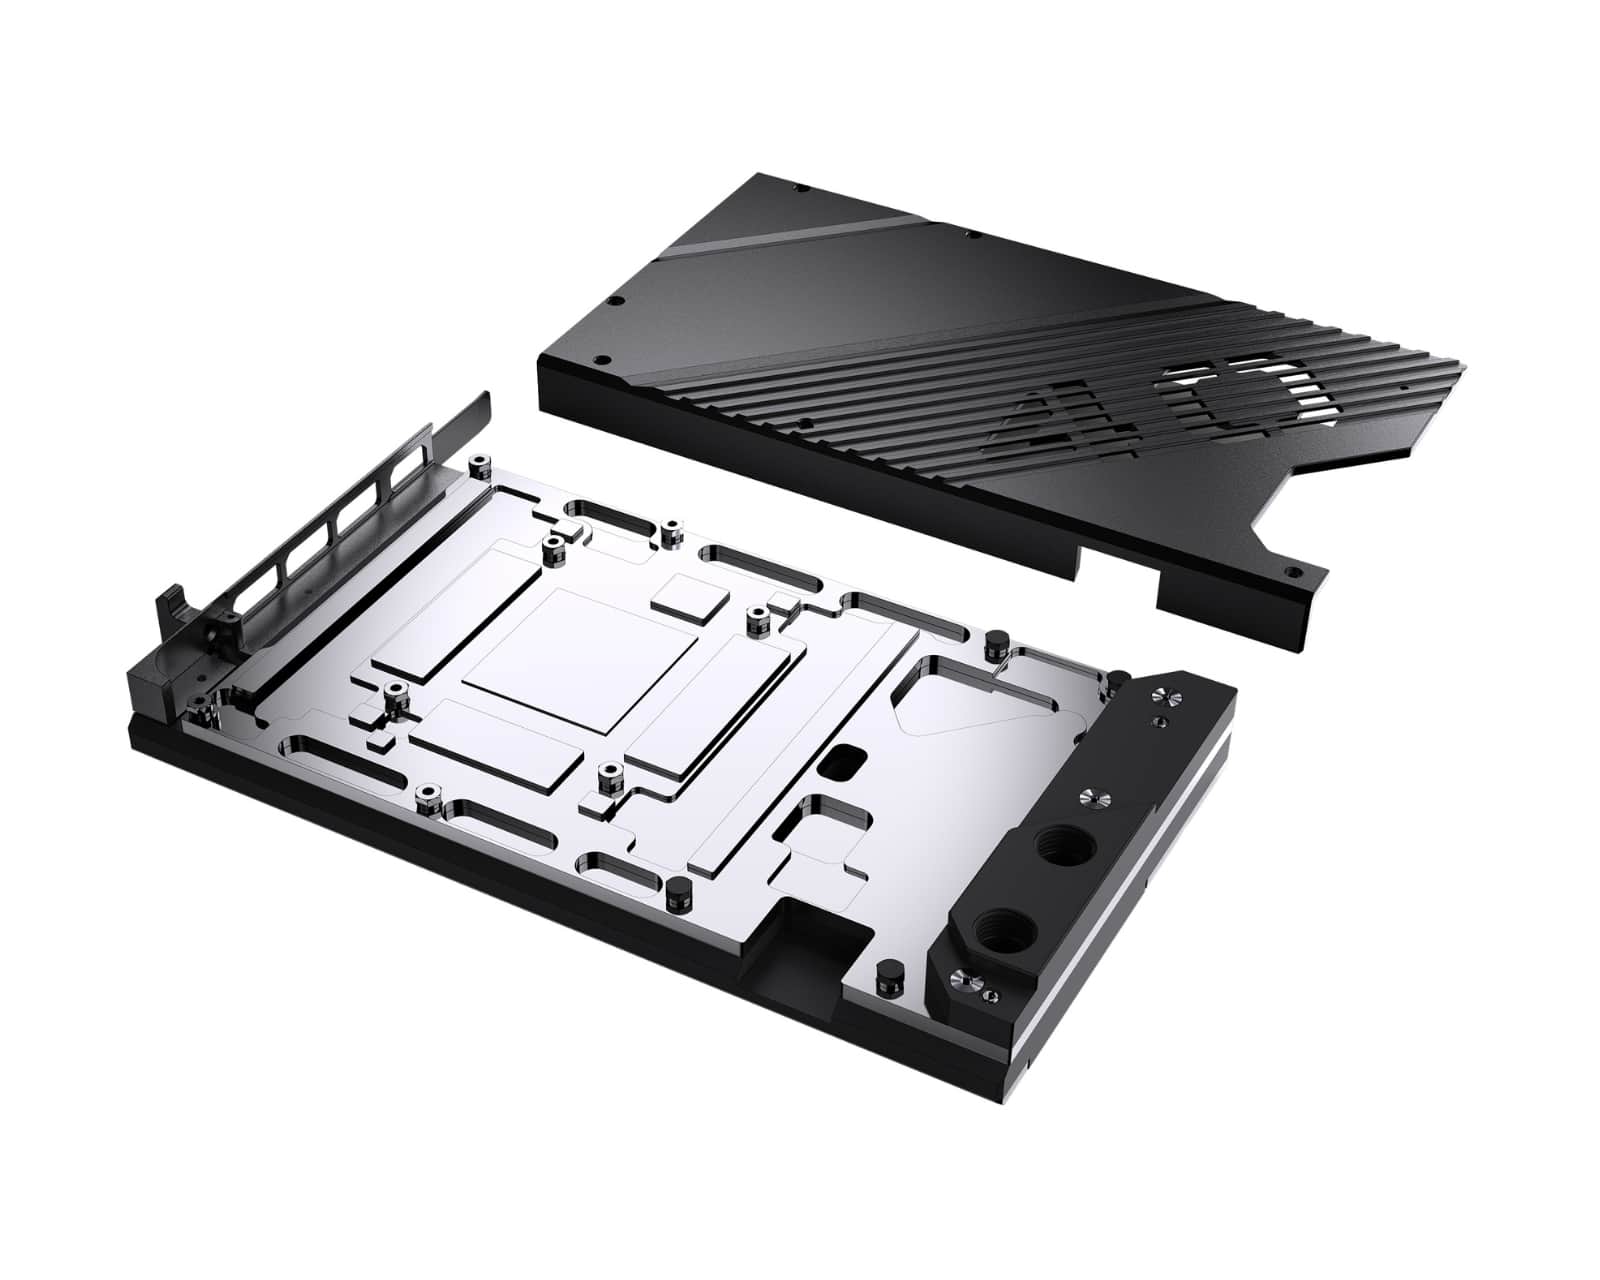 Granzon Full Armor GPU Water Block and Backplate for nVidia RTX 4090 Founders Edition (GBN-RTX4090FE) - PrimoChill - KEEPING IT COOL